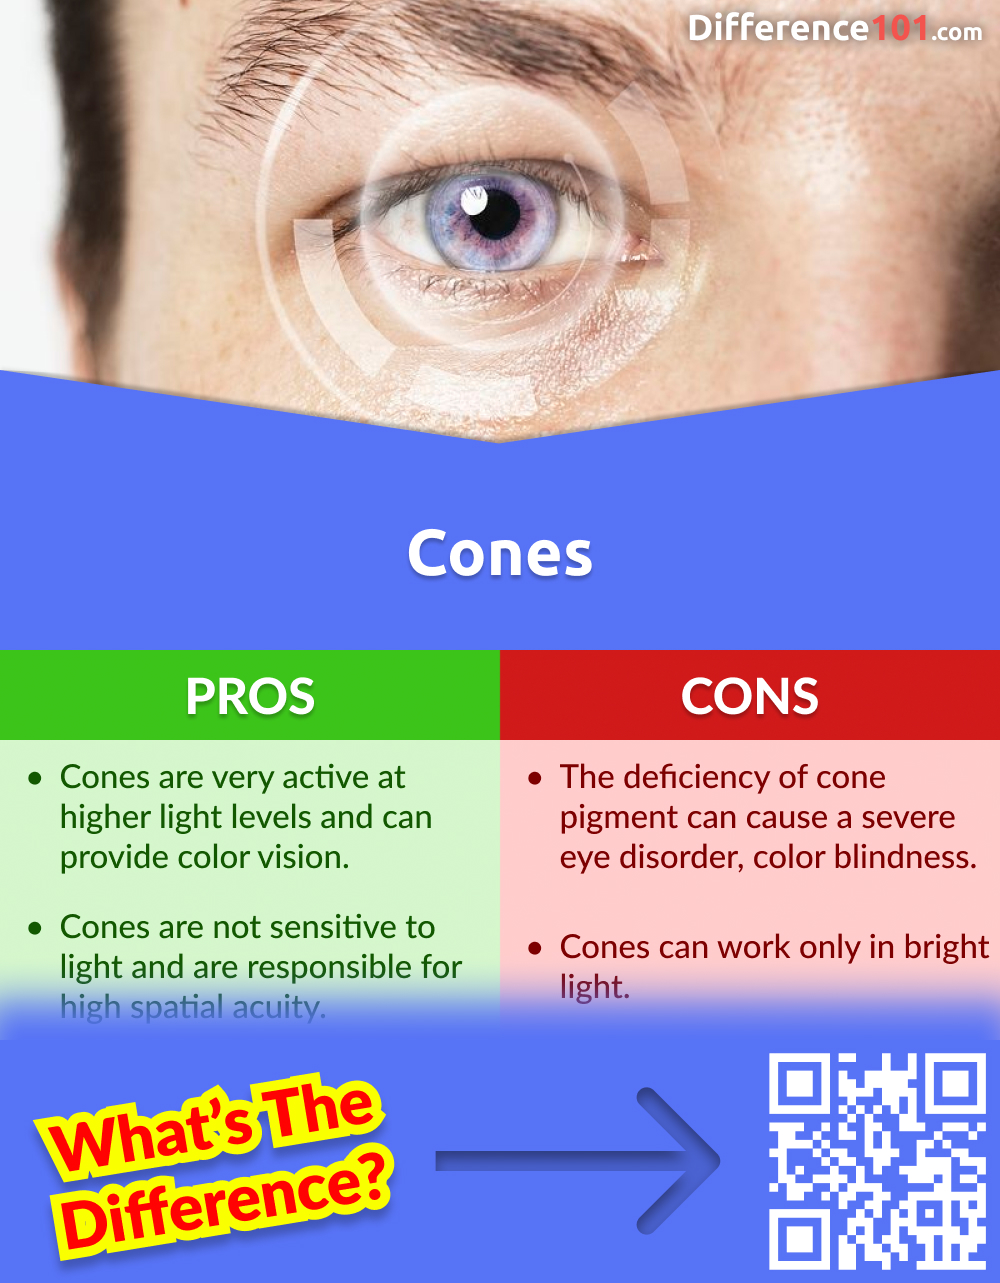 Pros and Cons of Cones